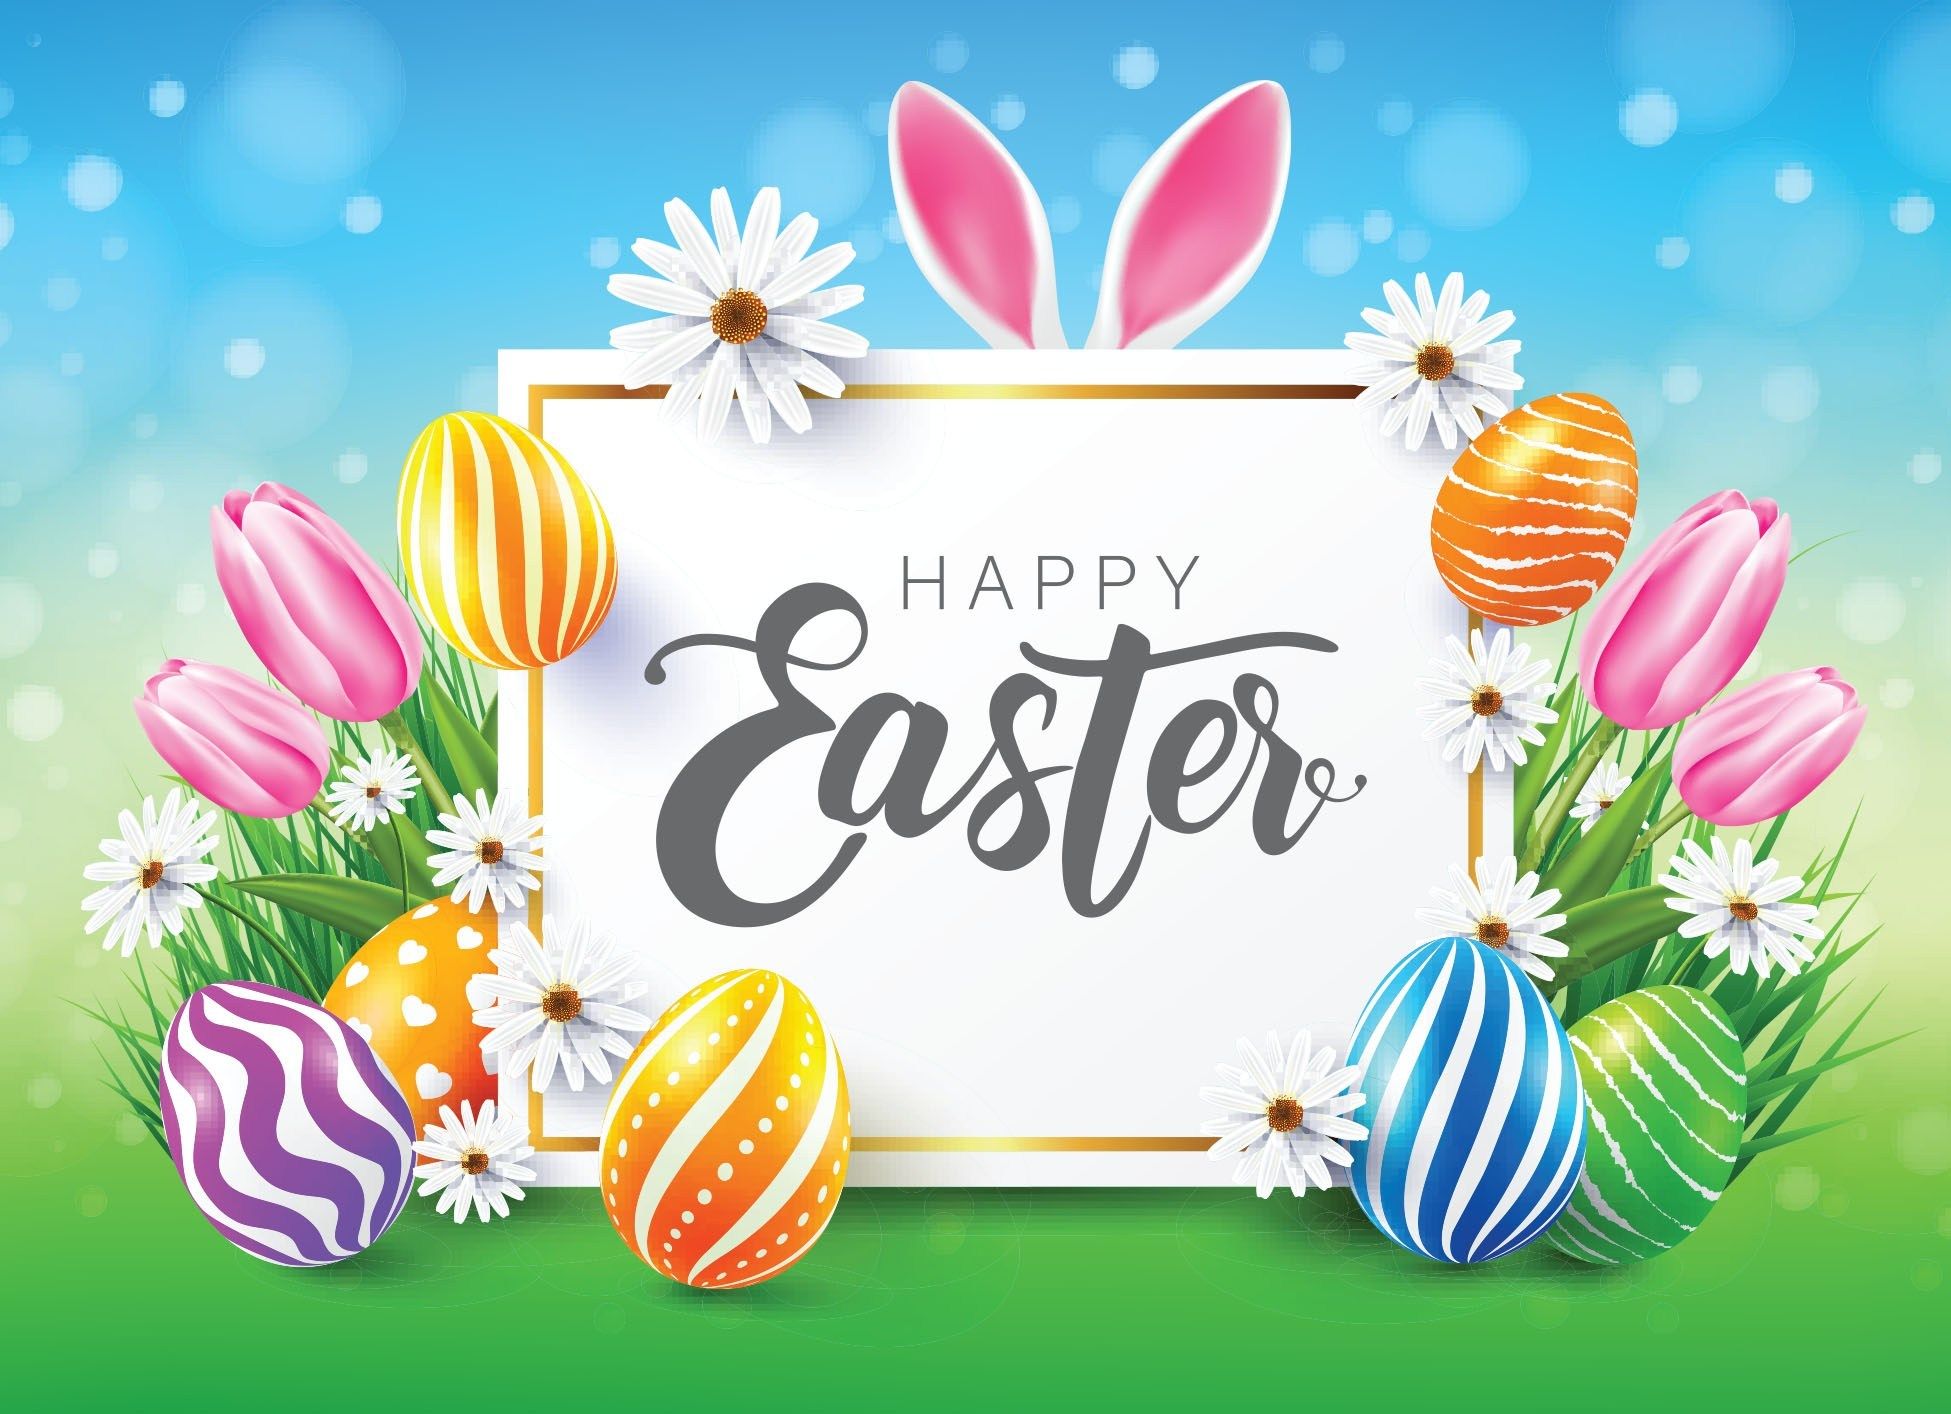 Happy Easter 2020 HD Wallpapers | HD Background Images | Photos | Pictures  – YL Computing